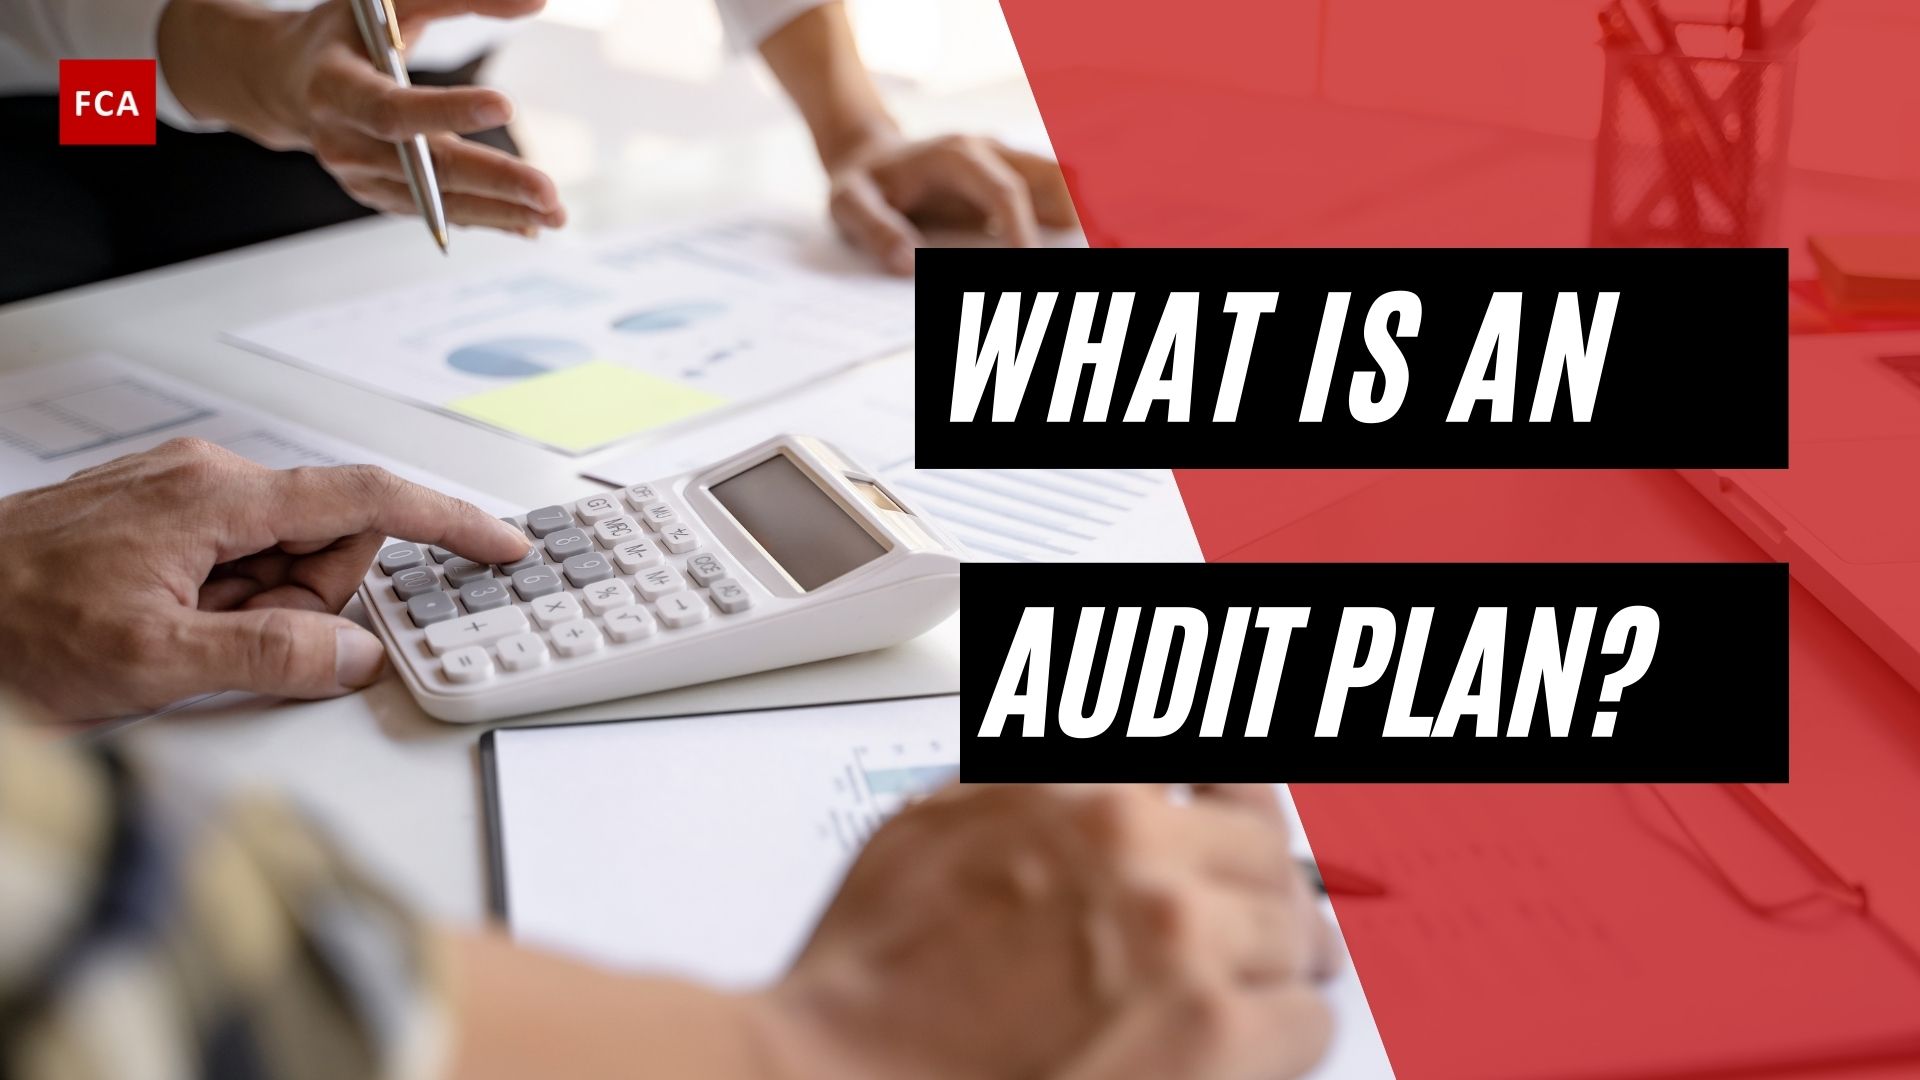 What Is An Audit Plan?